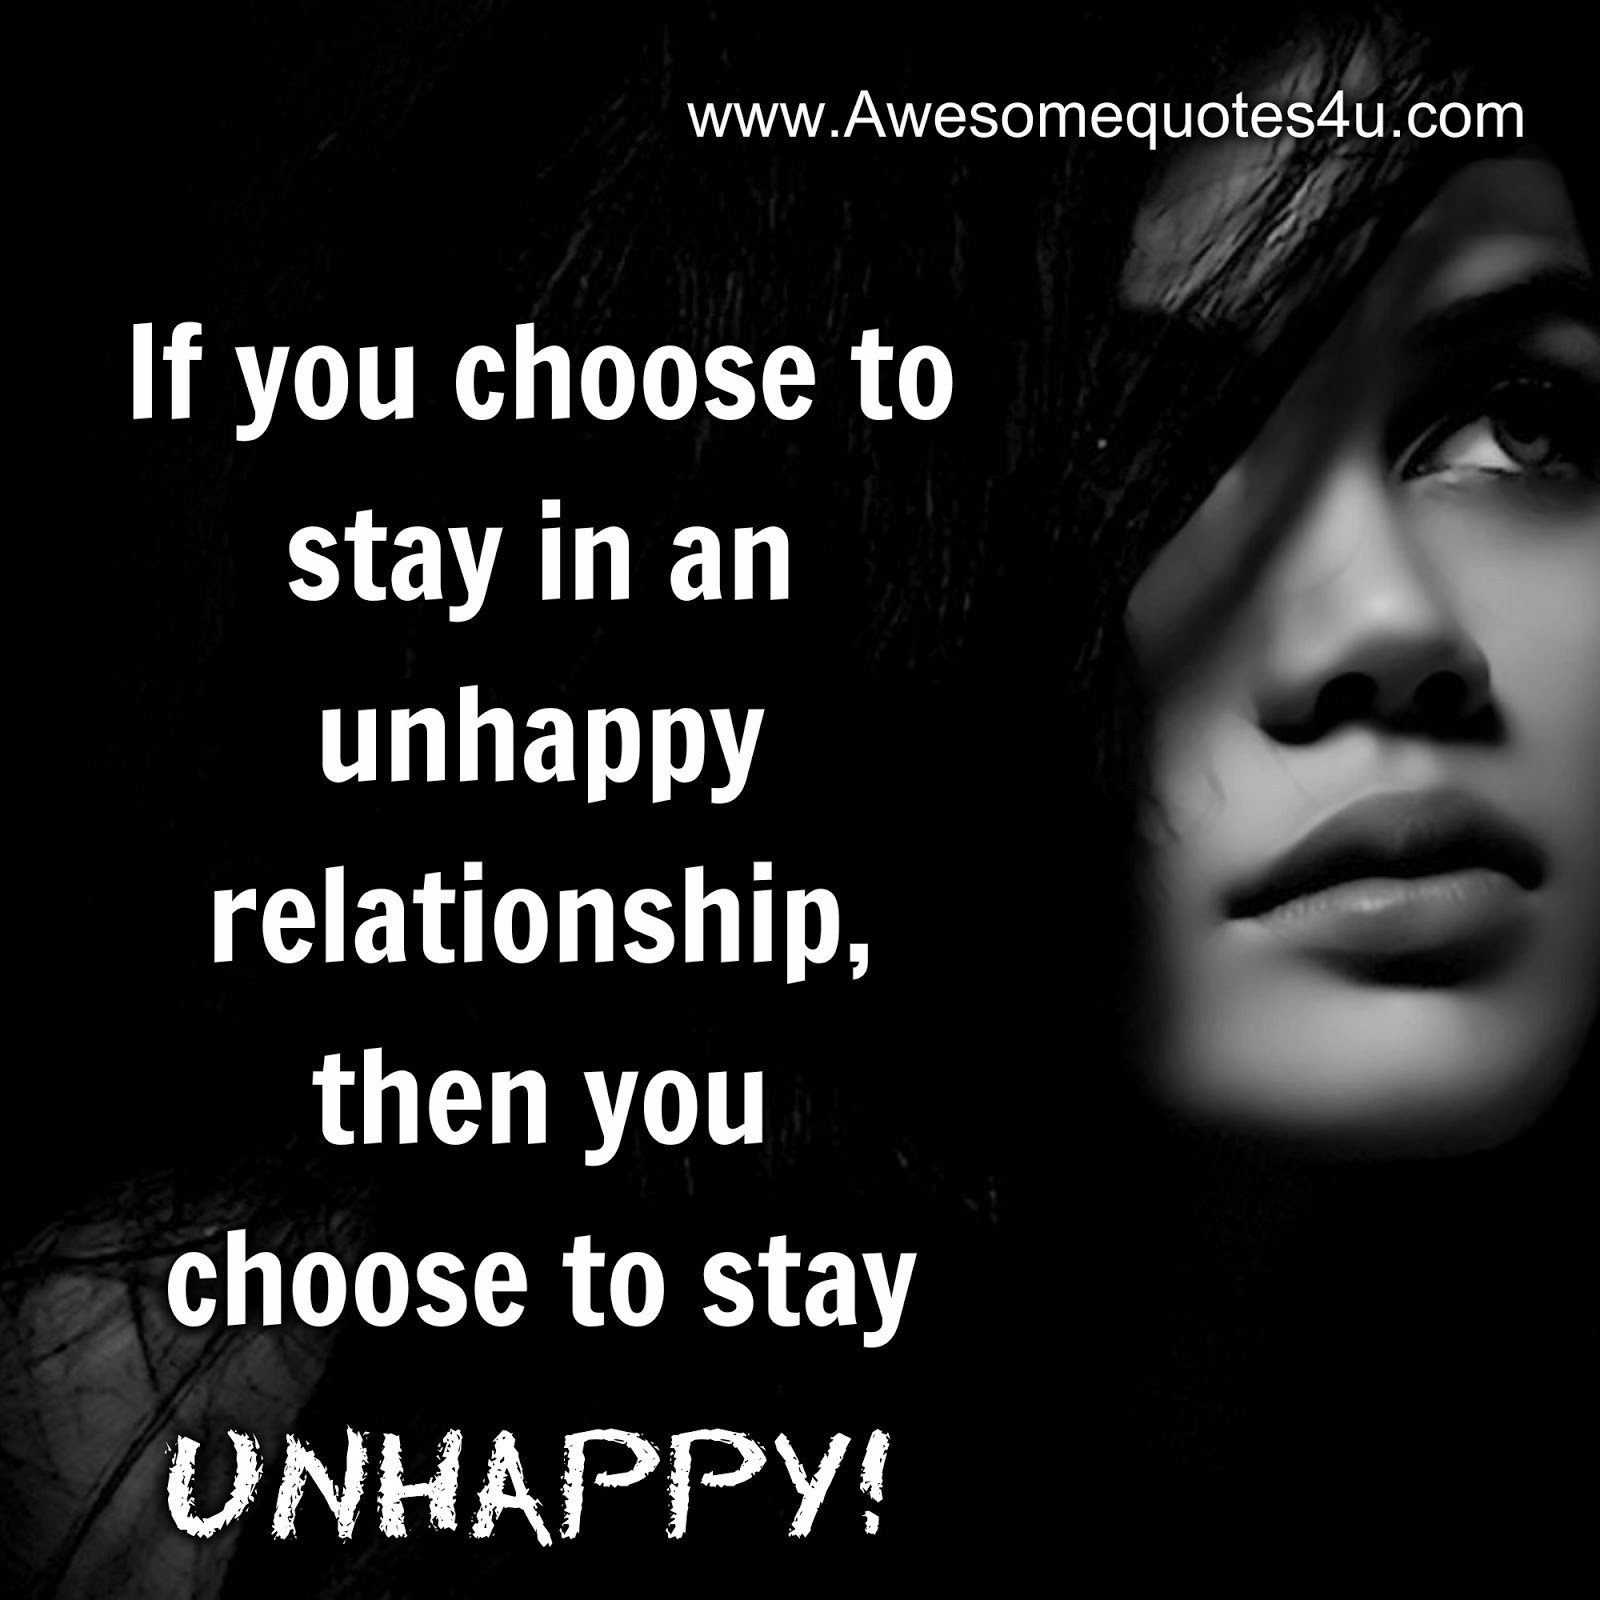 Unhappy Relationship Quotes
 Awesome Quotes If you choose to stay in an unhappy